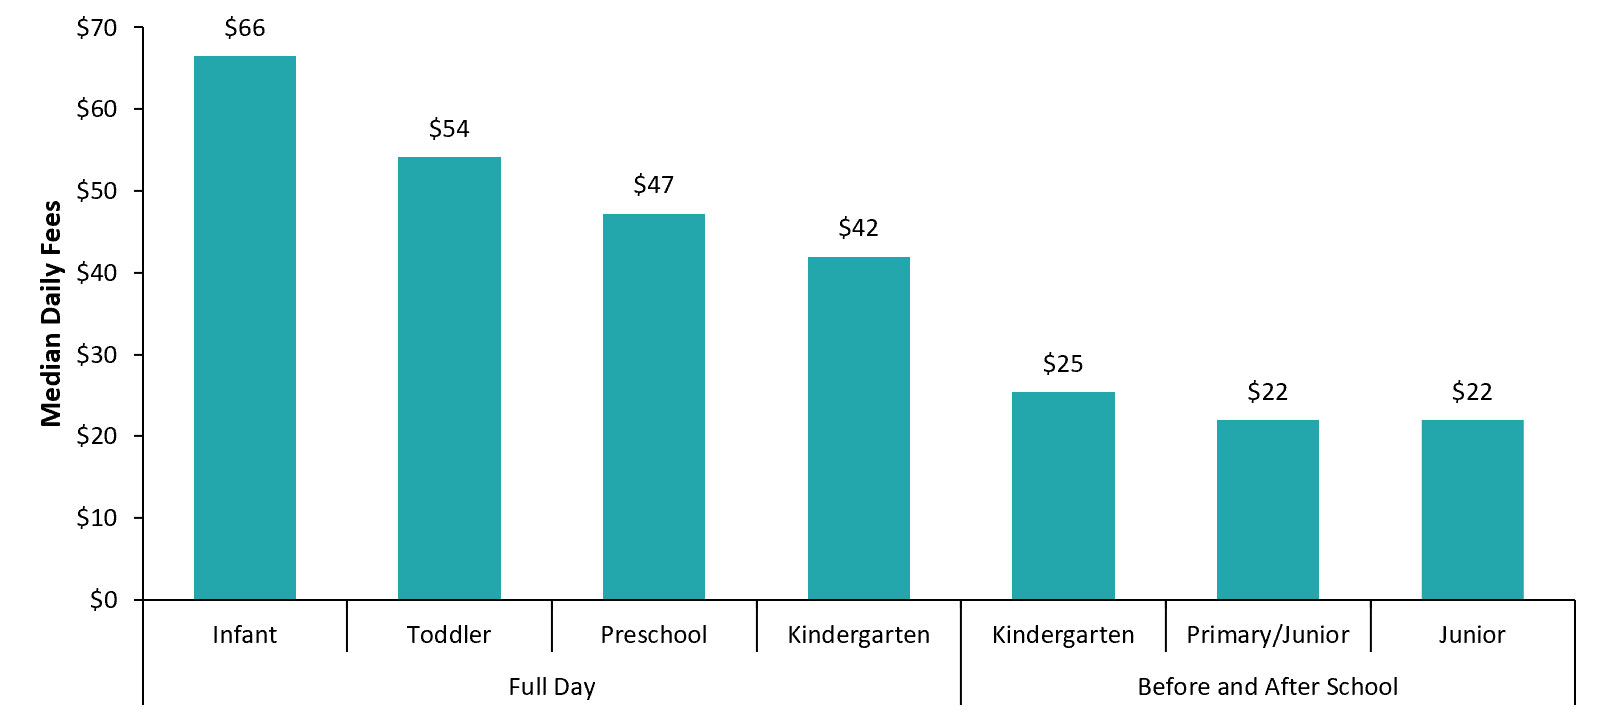 Median Daily Fees by Age Group Among Licensed Child Care Centres, 2019